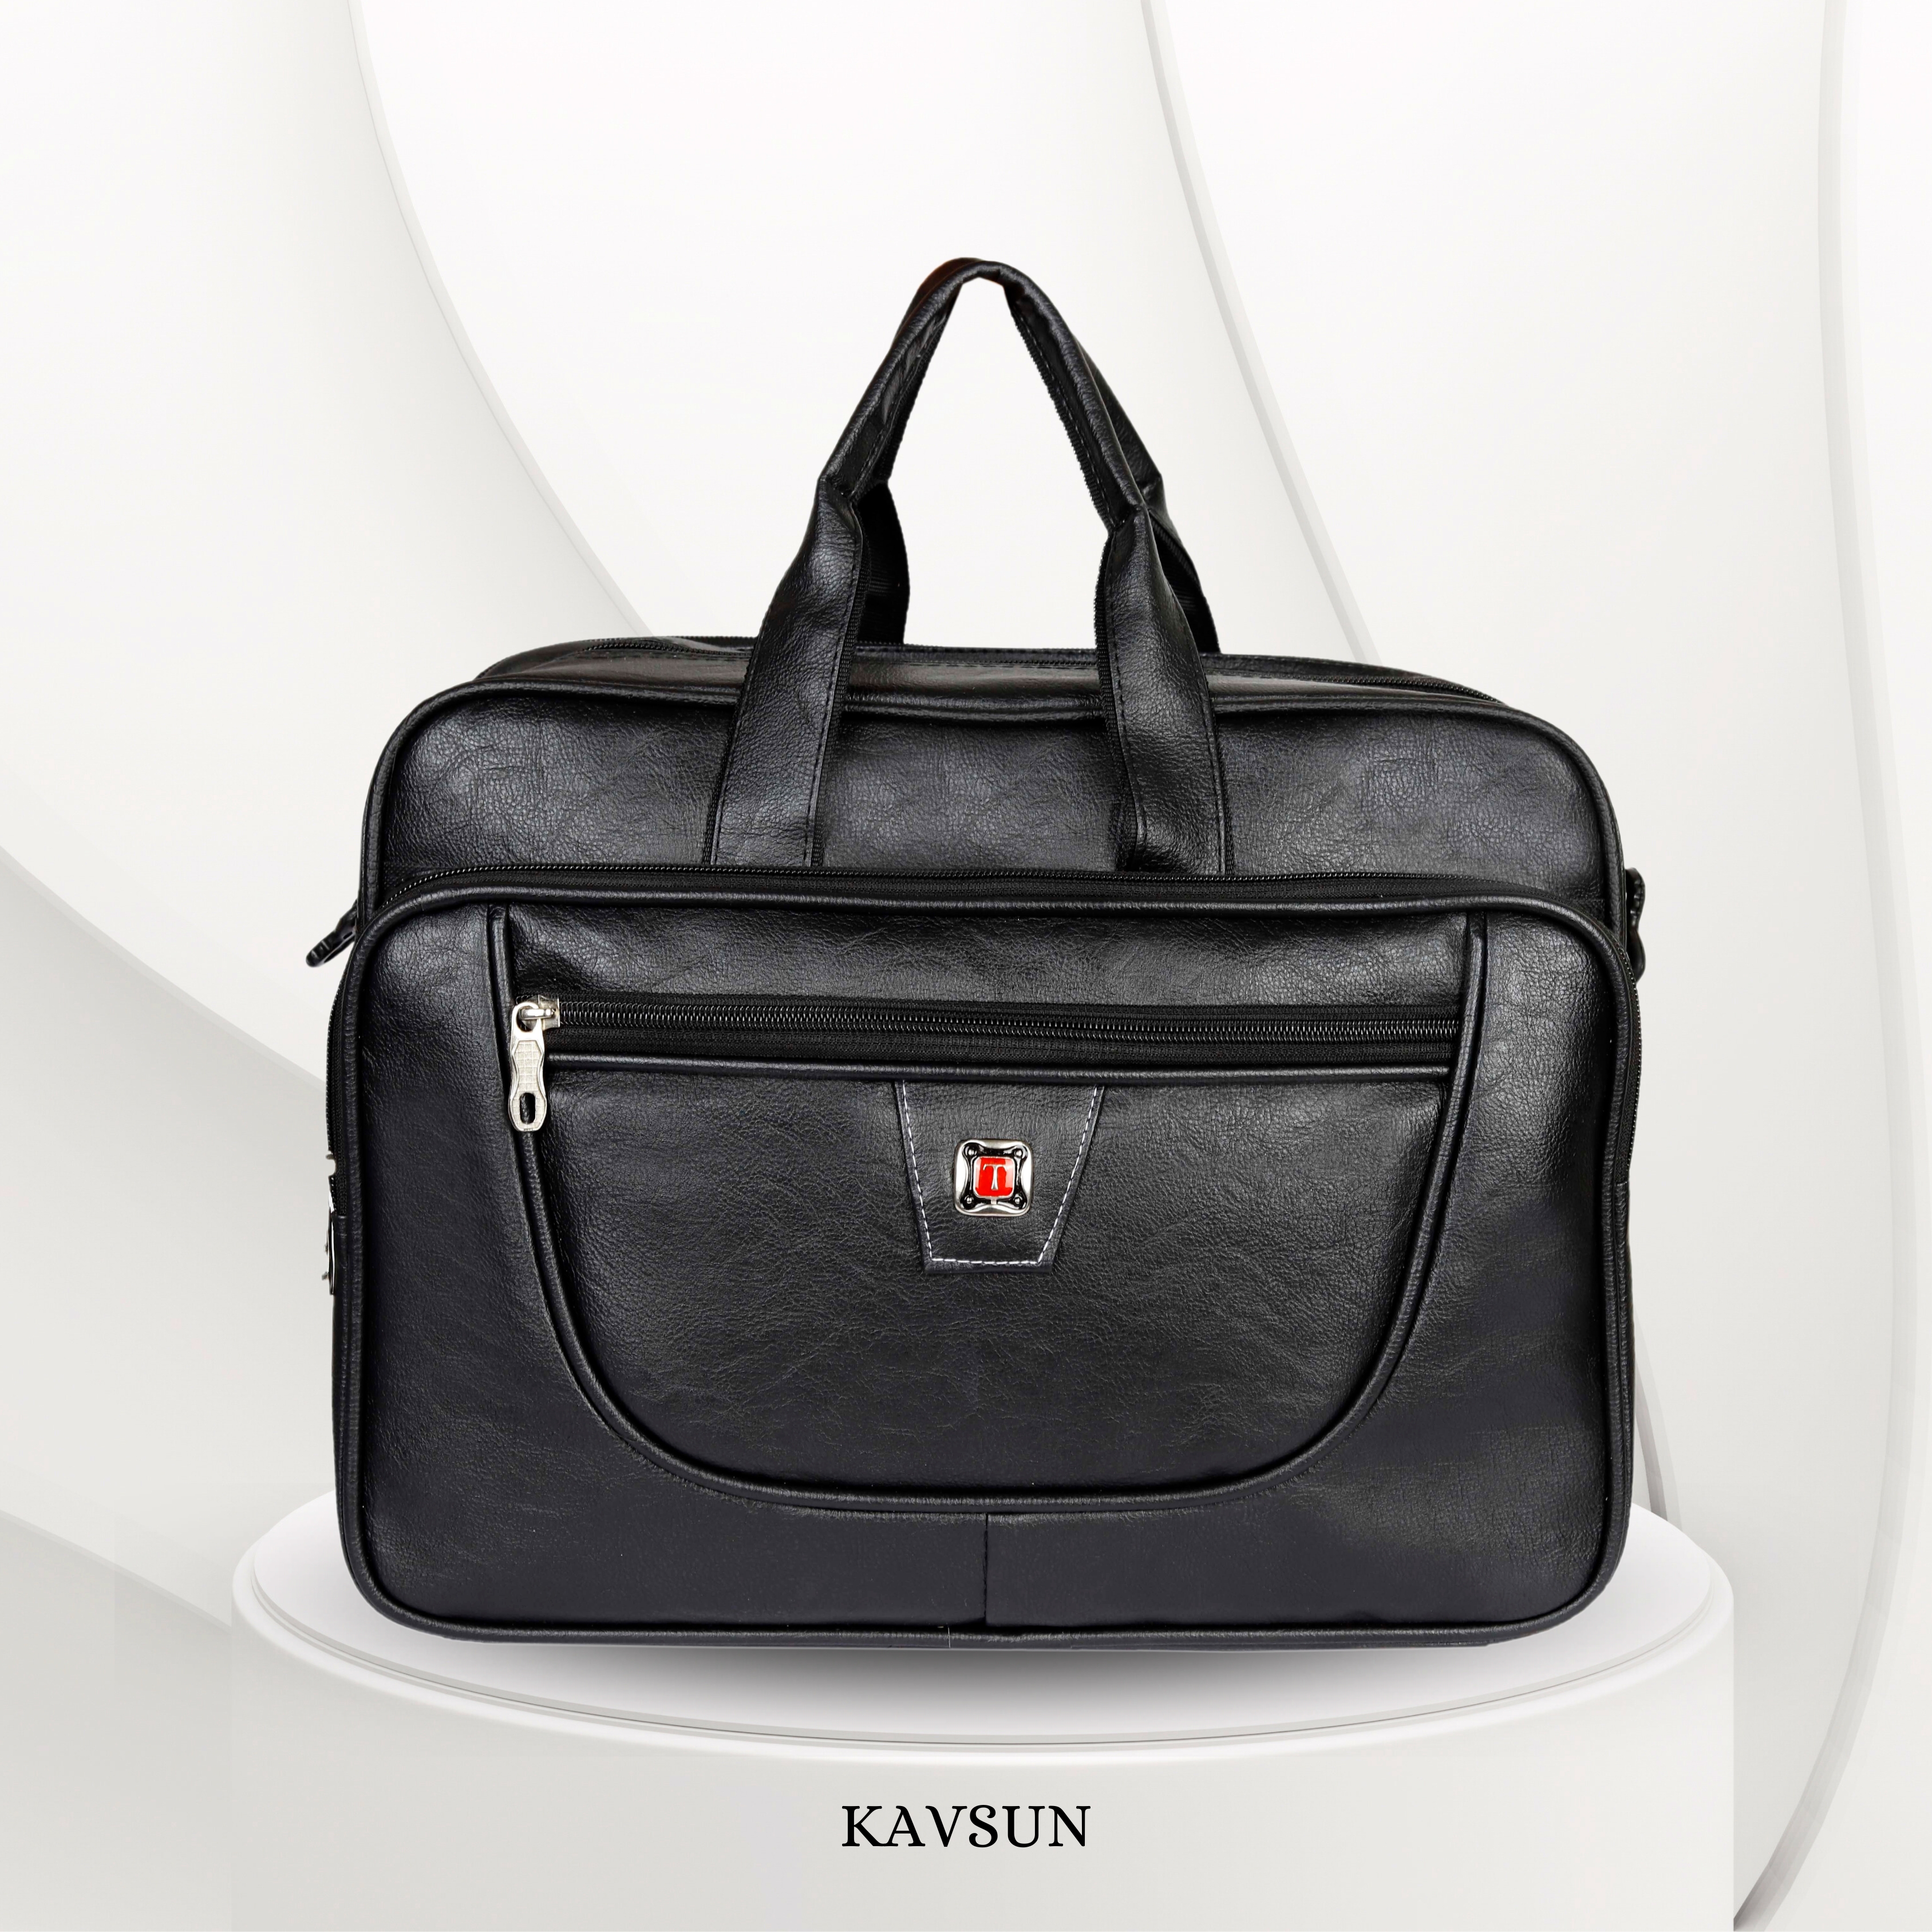 KAVSUN Black Laptop Bag With Two Big Compartment